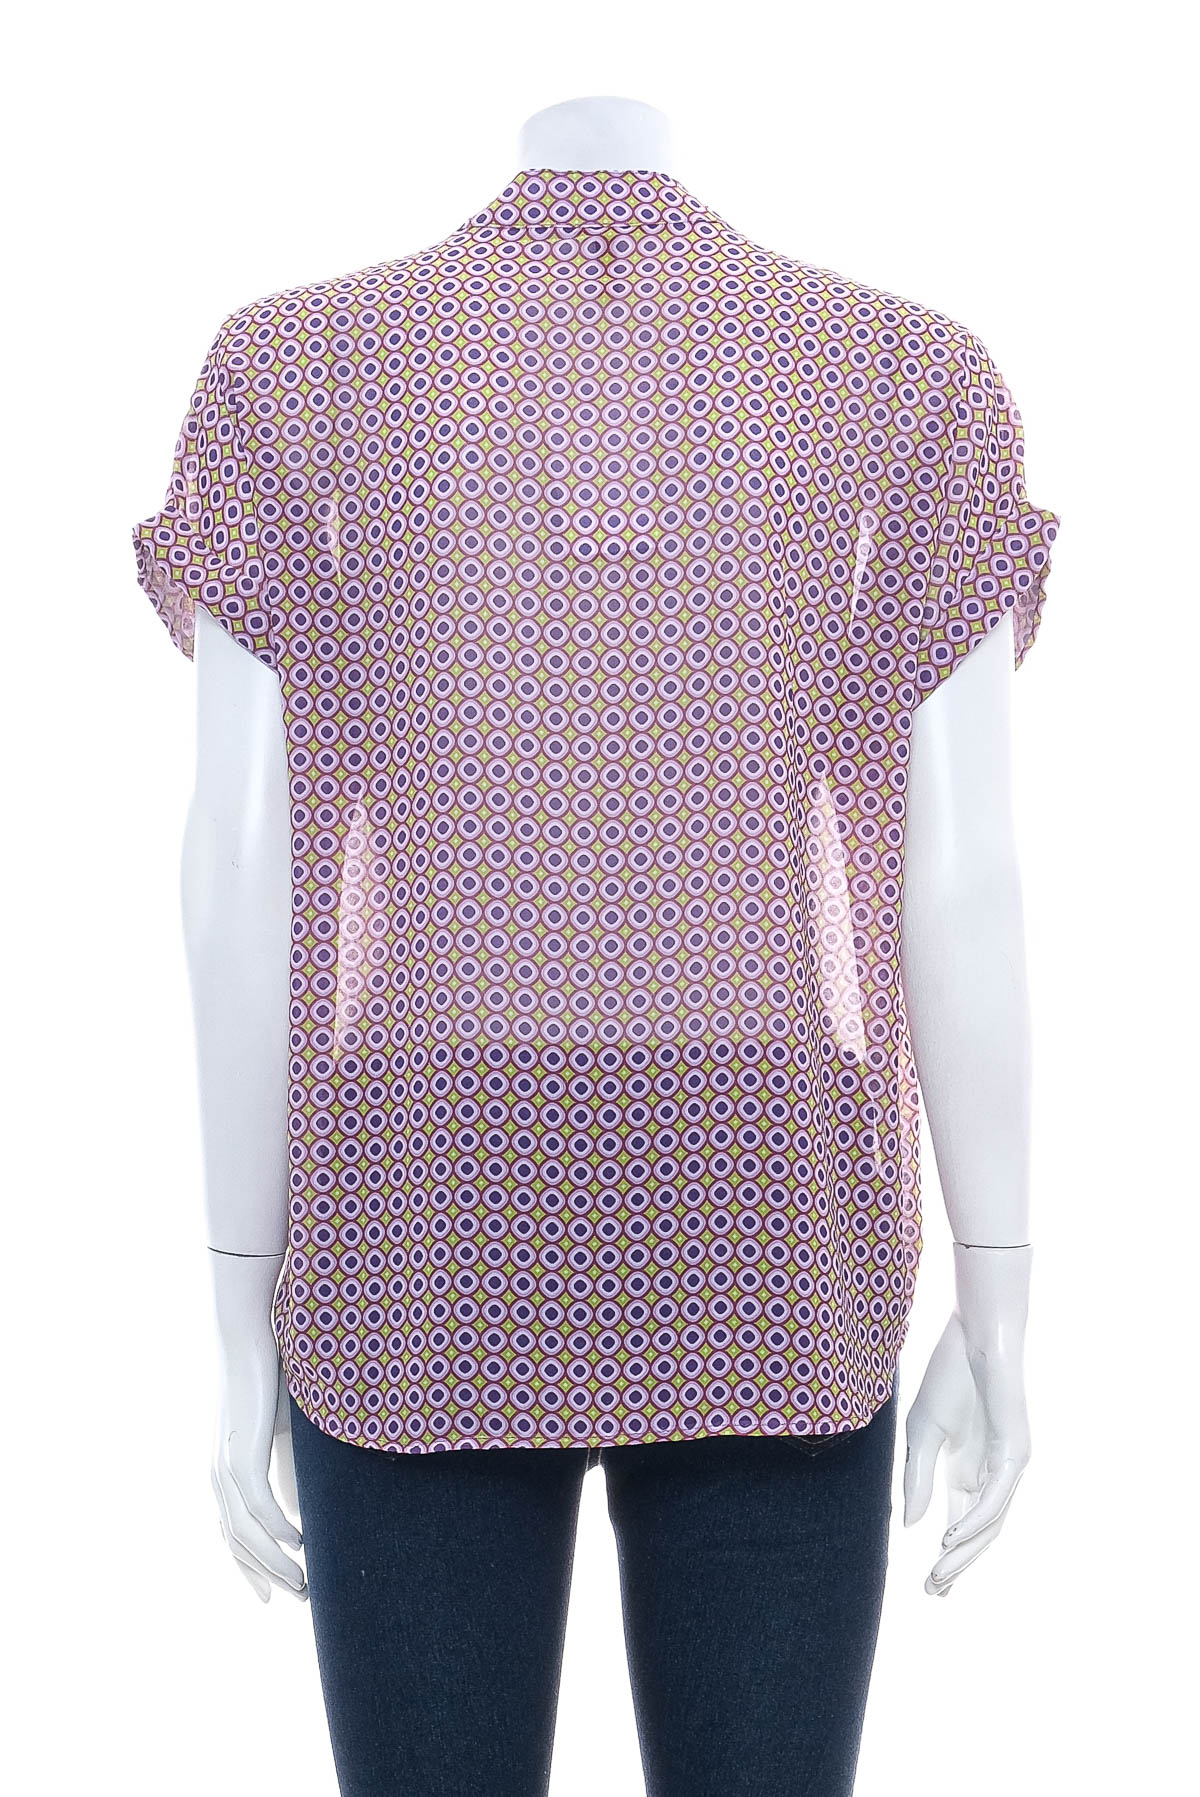 Women's shirt - New Collection - 1